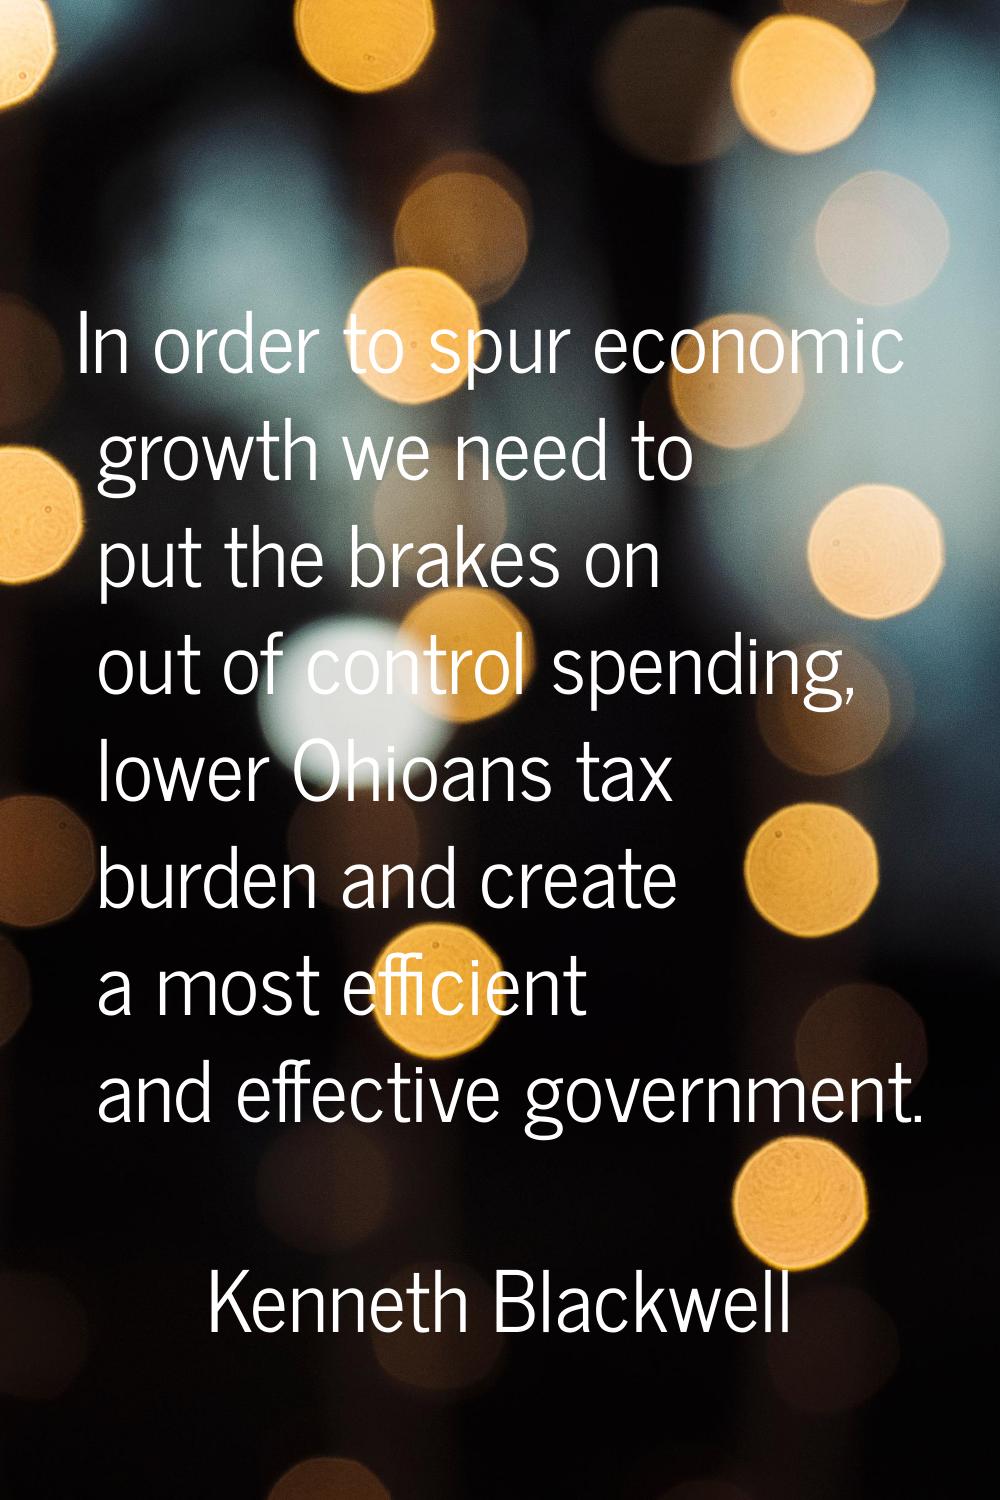 In order to spur economic growth we need to put the brakes on out of control spending, lower Ohioan